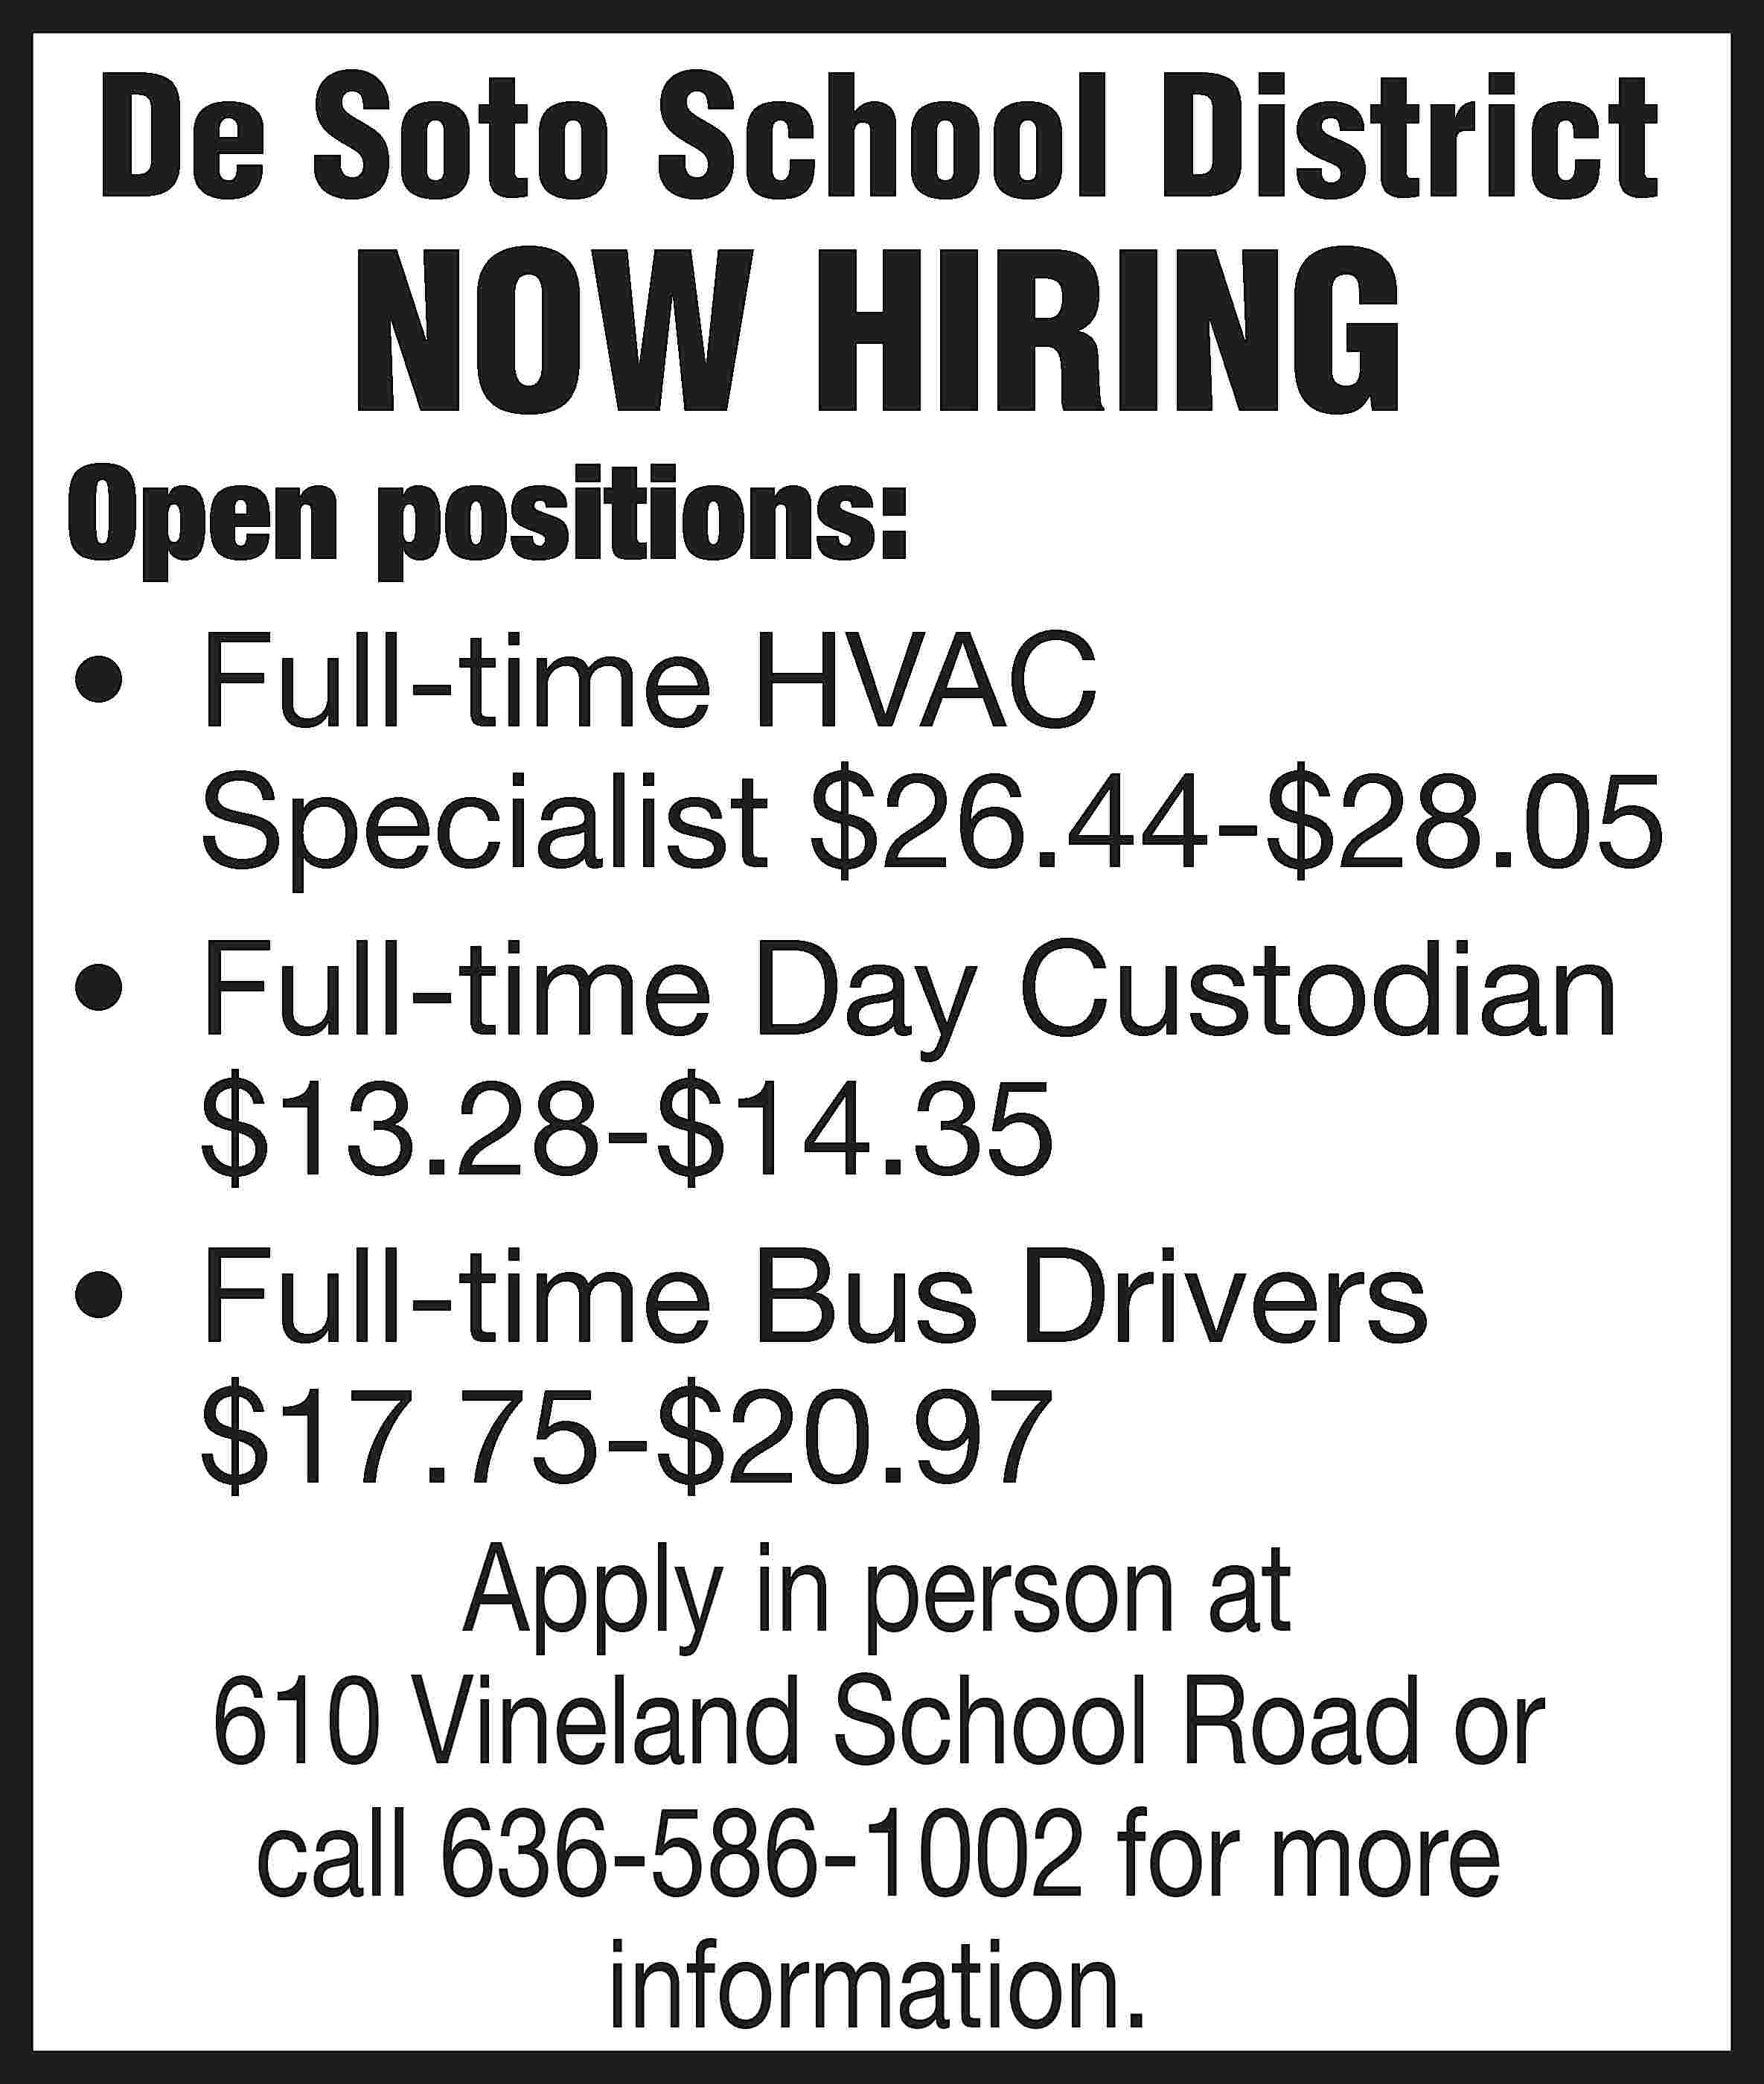 De Soto School District NOW  De Soto School District NOW HIRING Open positions: •	 Full-time HVAC Specialist $26.44-$28.05 •	 Full-time Day Custodian $13.28-$14.35 •	 Full-time Bus Drivers $17.75-$20.97 Apply in person at 610 Vineland School Road or call 636-586-1002 for more information.